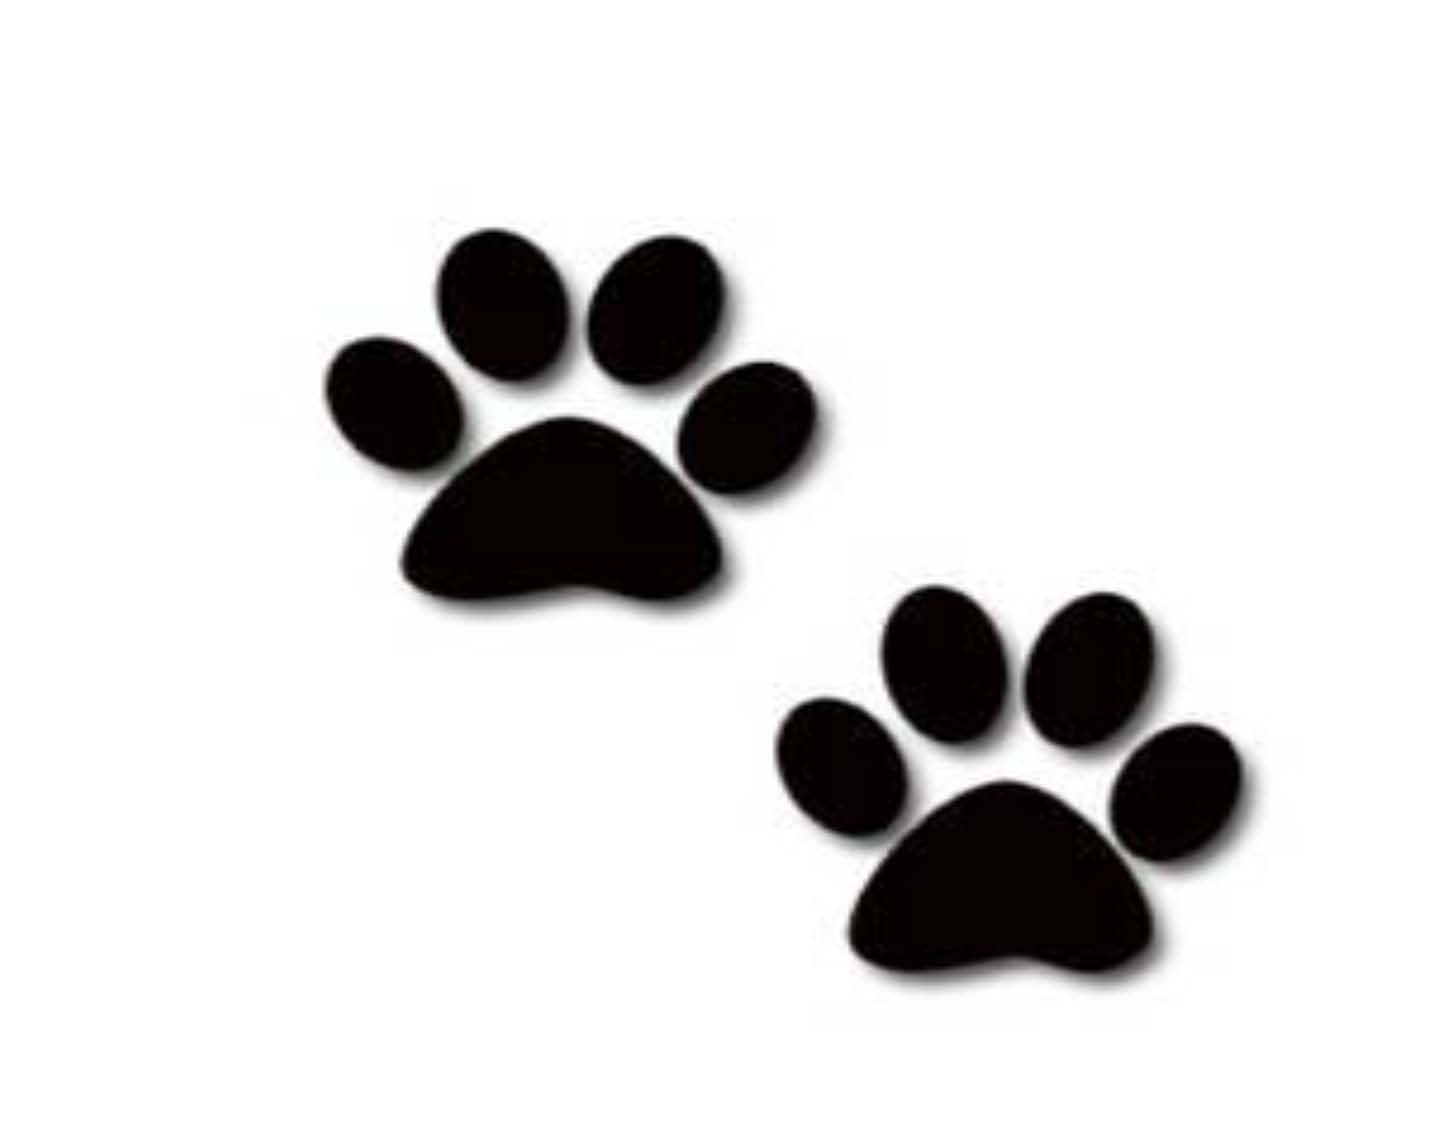 Dog Paw Print Image | Free download on ClipArtMag